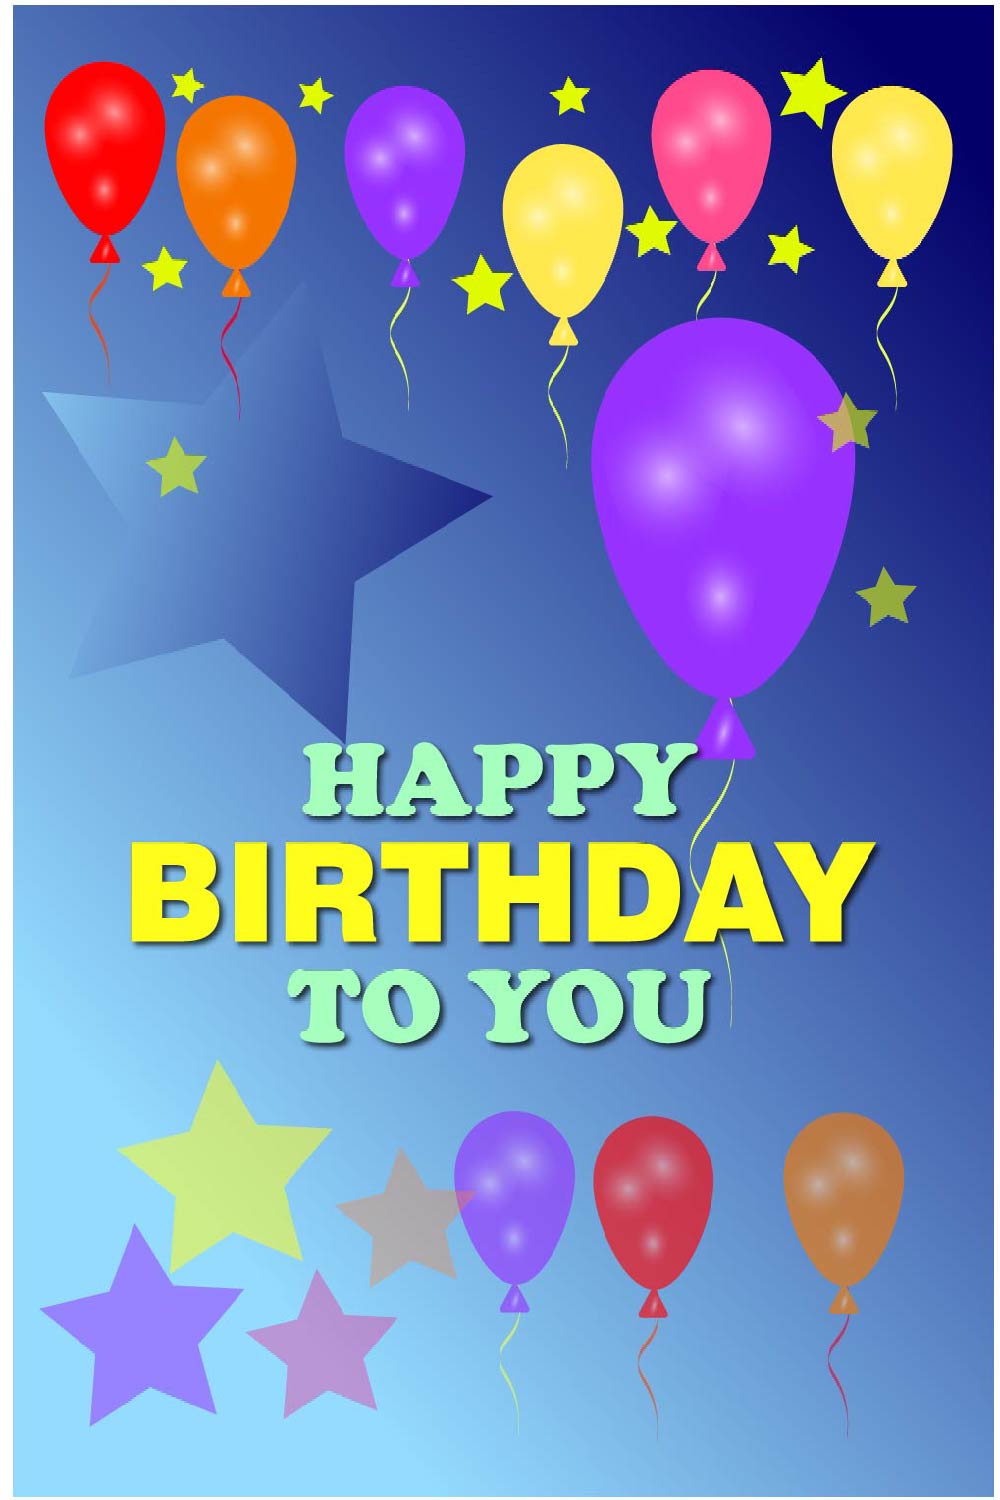 Happy Birthday Card Design with Balloons and Stars AI, PSD and EPS file and high quality JPG image in a zipped folder pinterest preview image.